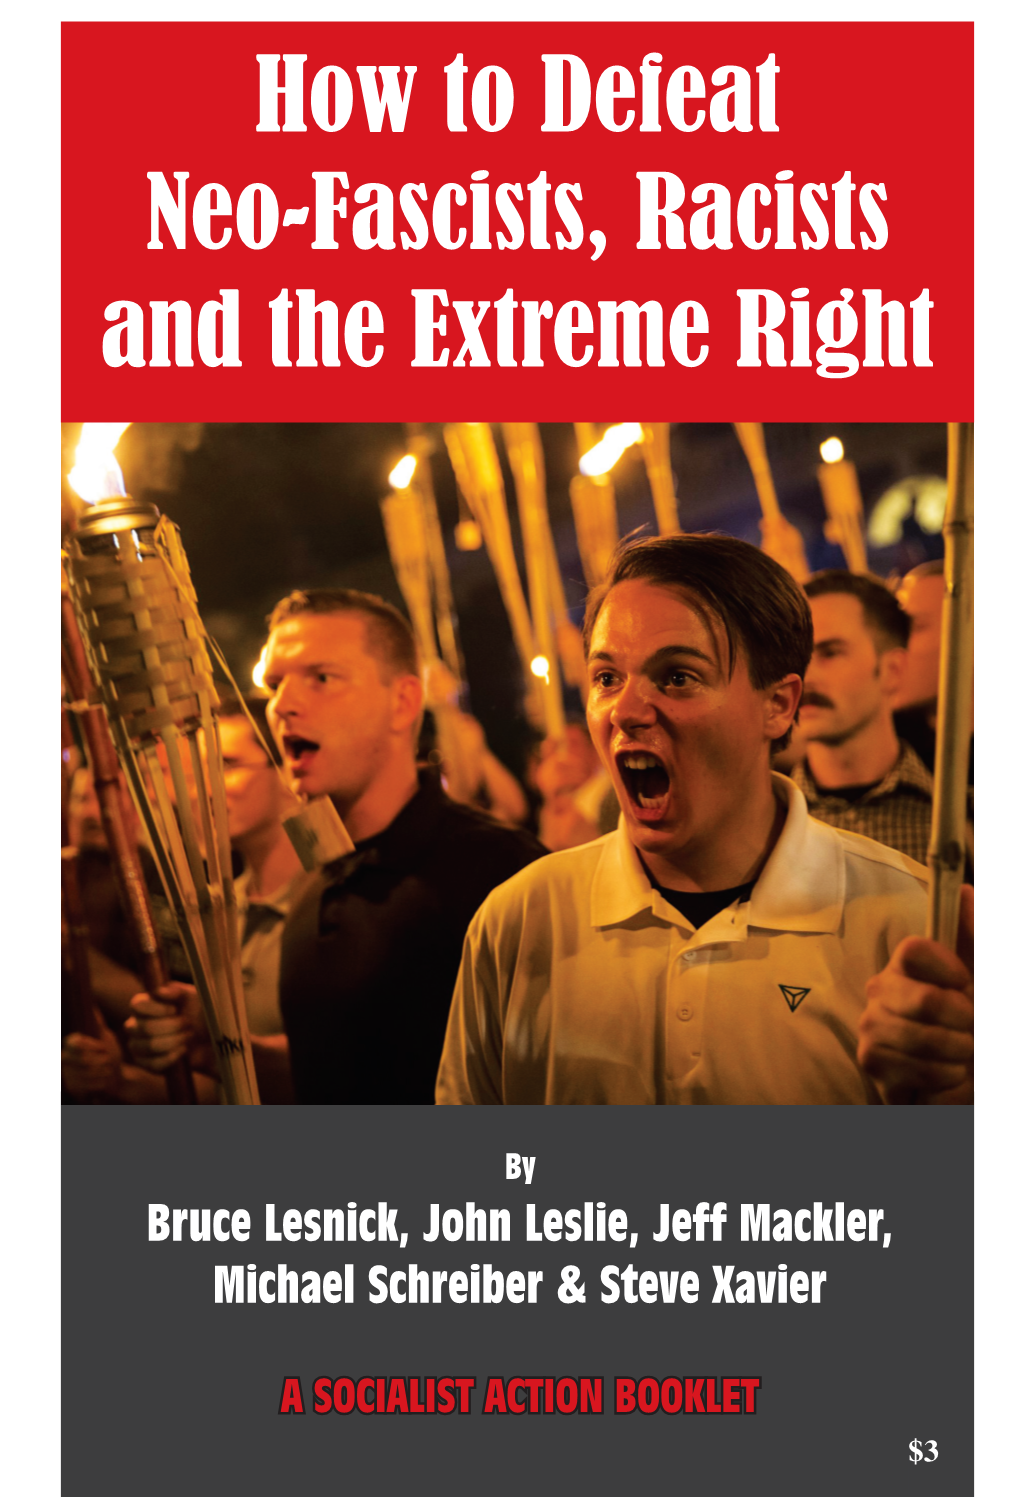 How to Defeat Neo-Fascists, Racists and the Extreme Right